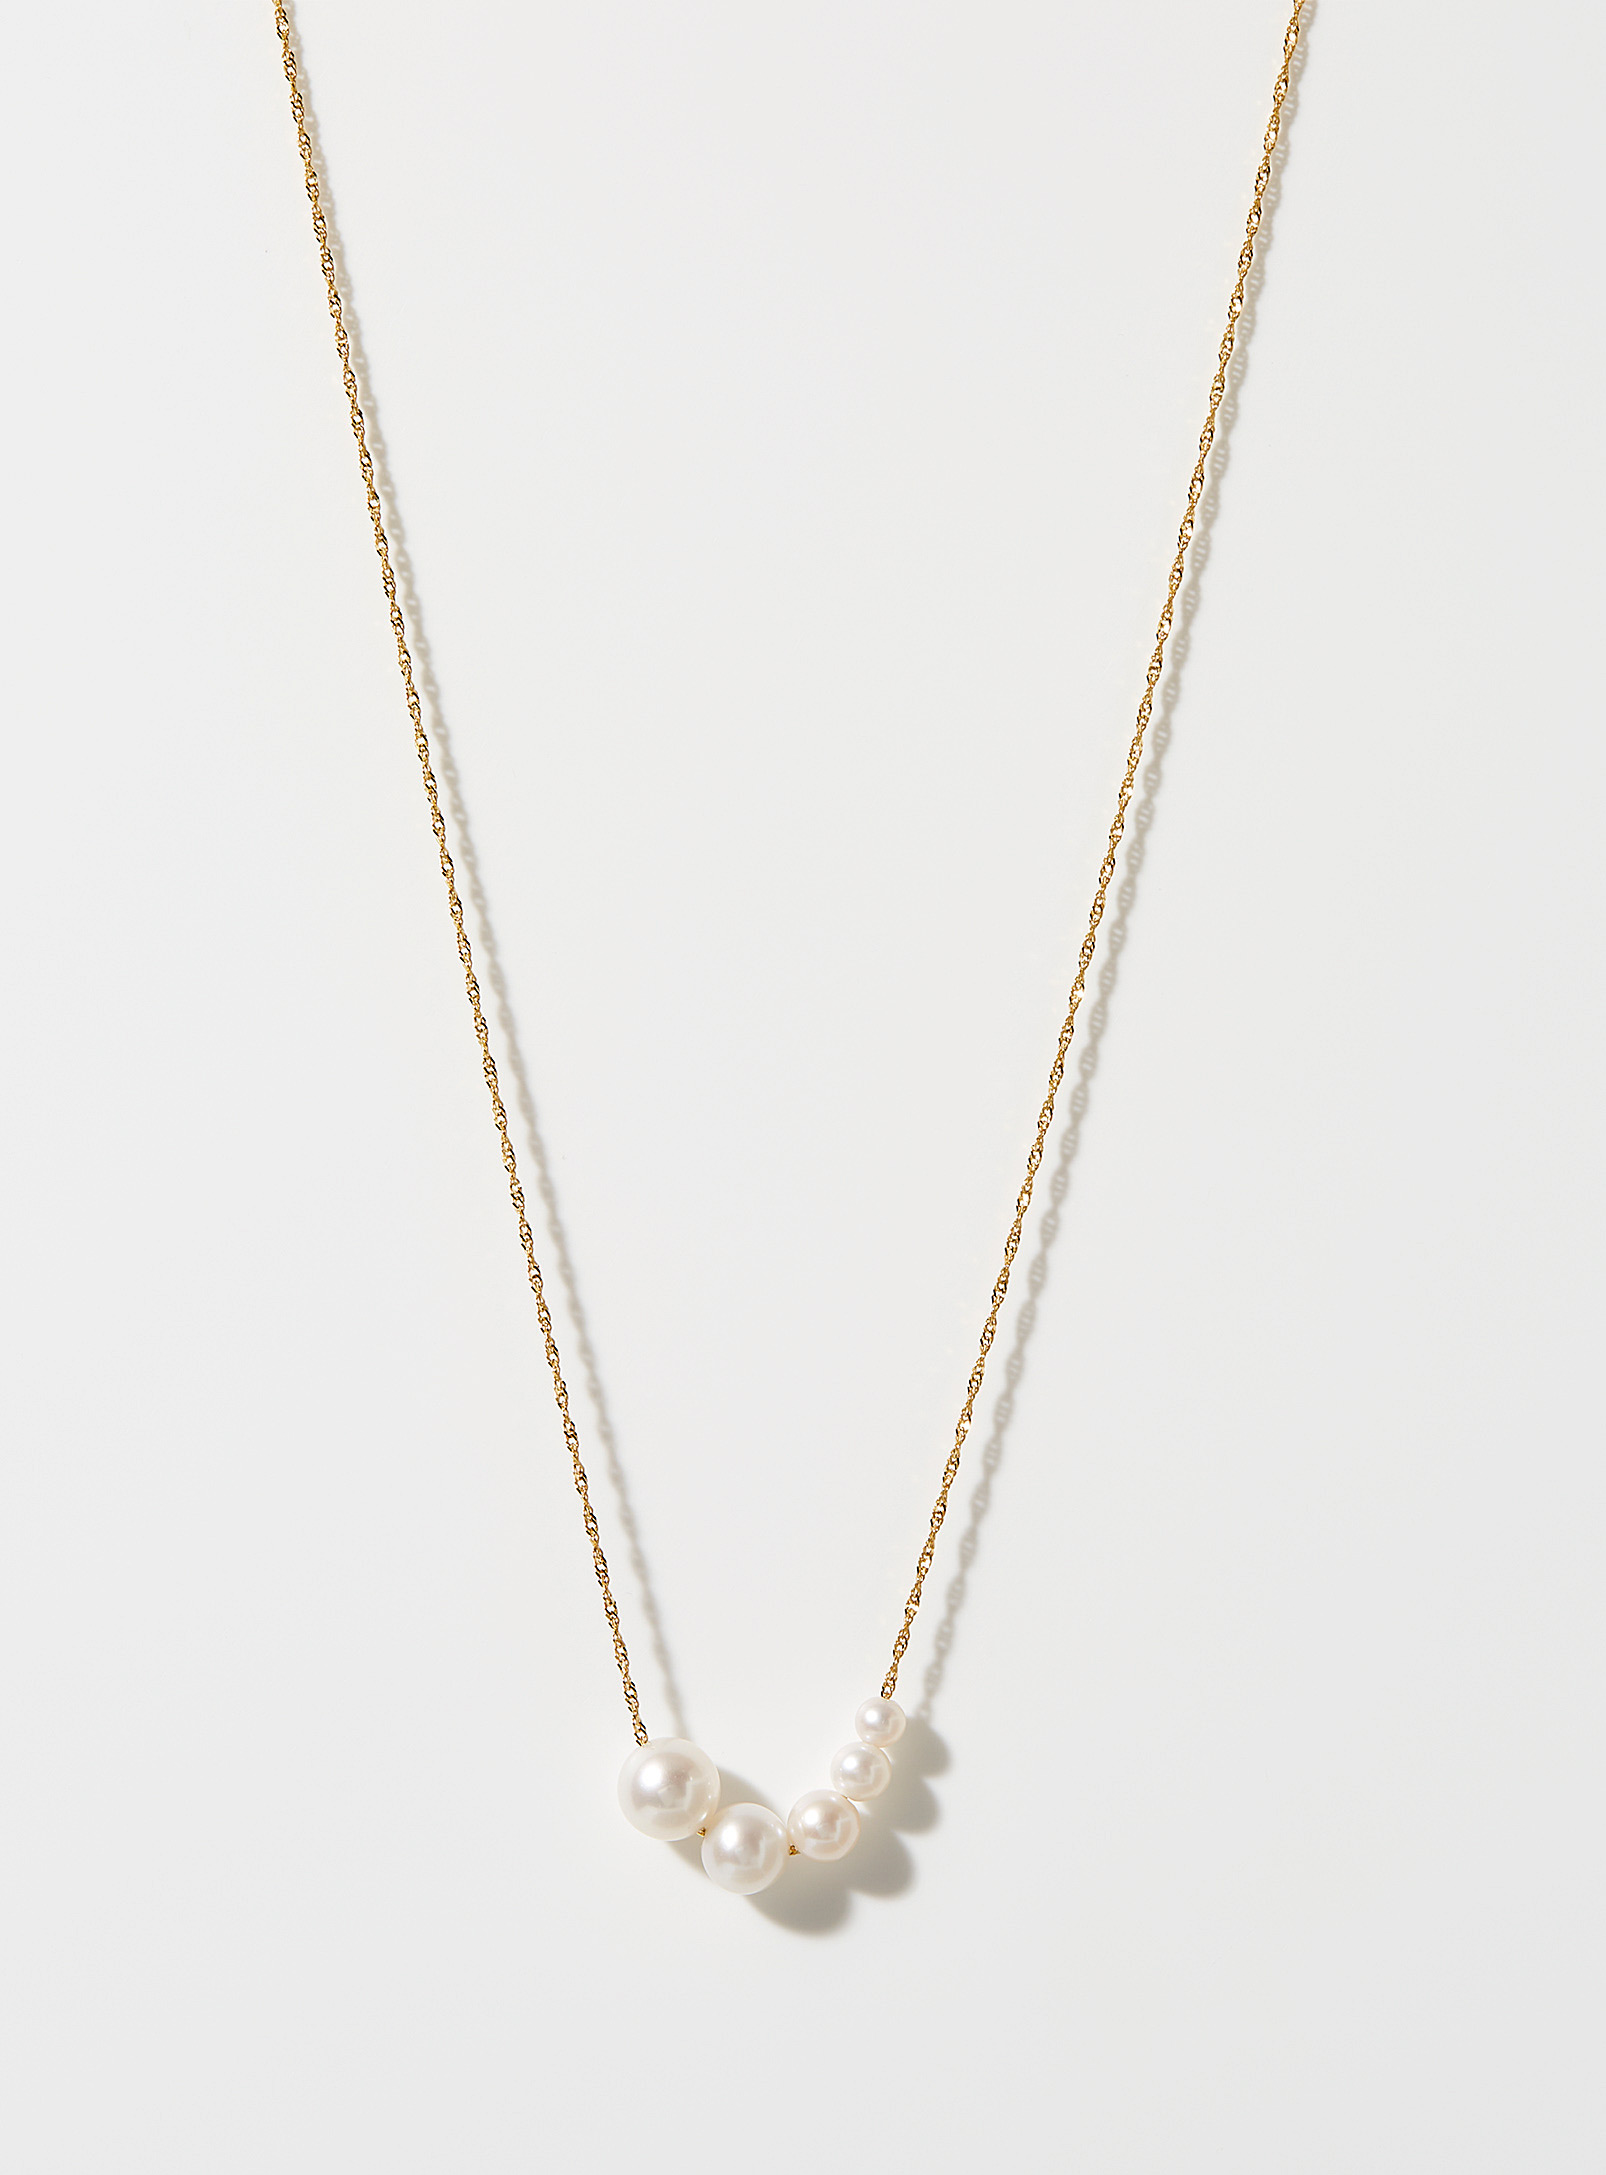 Poppy Finch Freshwater Pearls Twisted Chain In Patterned Yellow